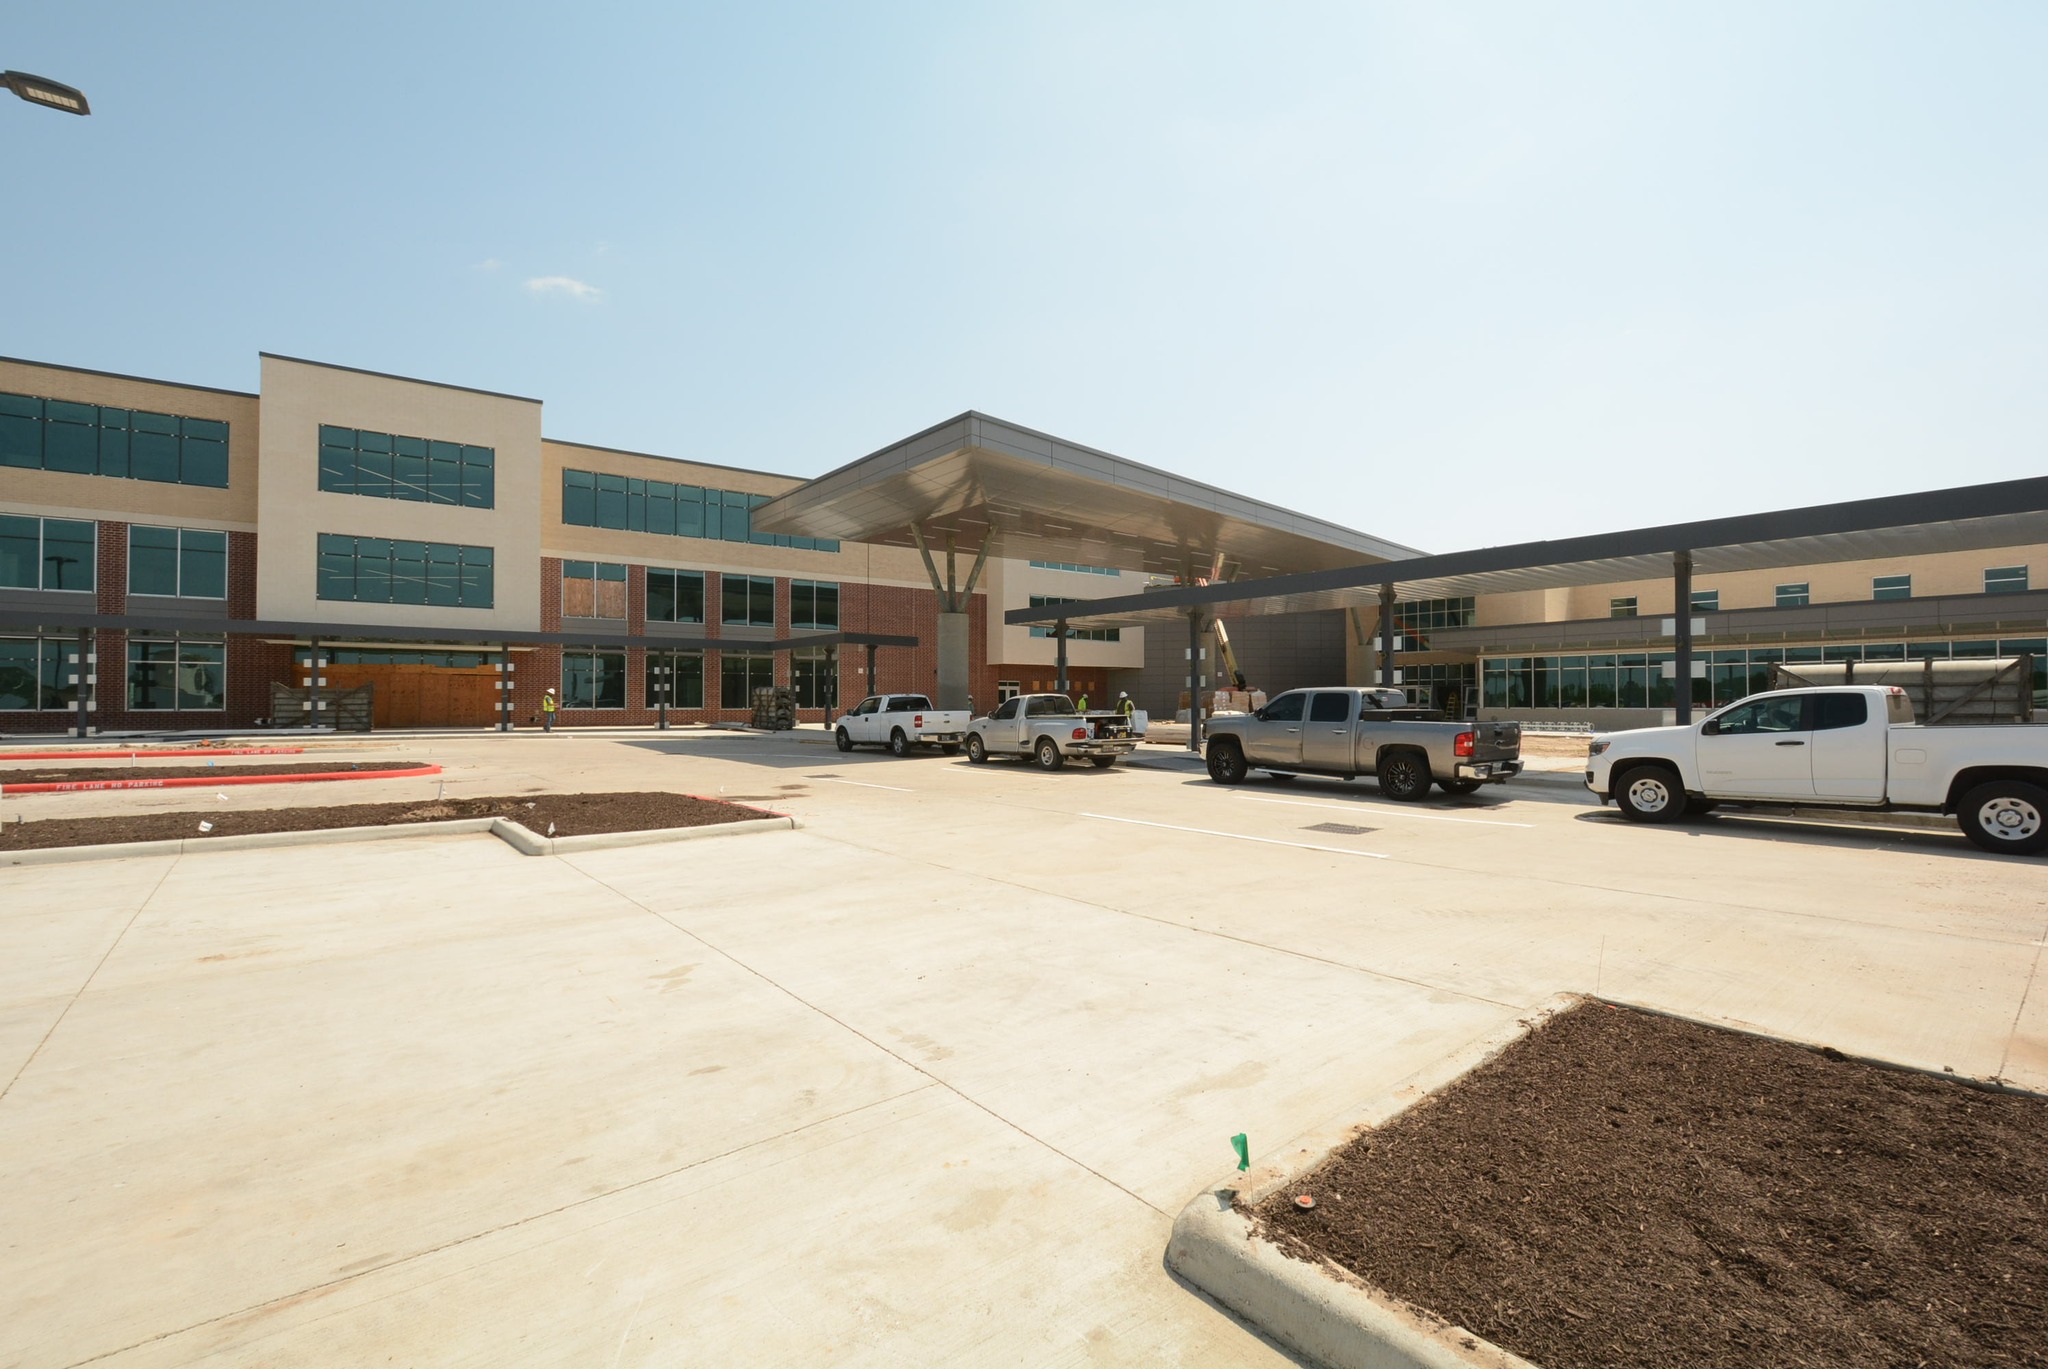 Construction Underway for New Elementary, Middle School in CFISD